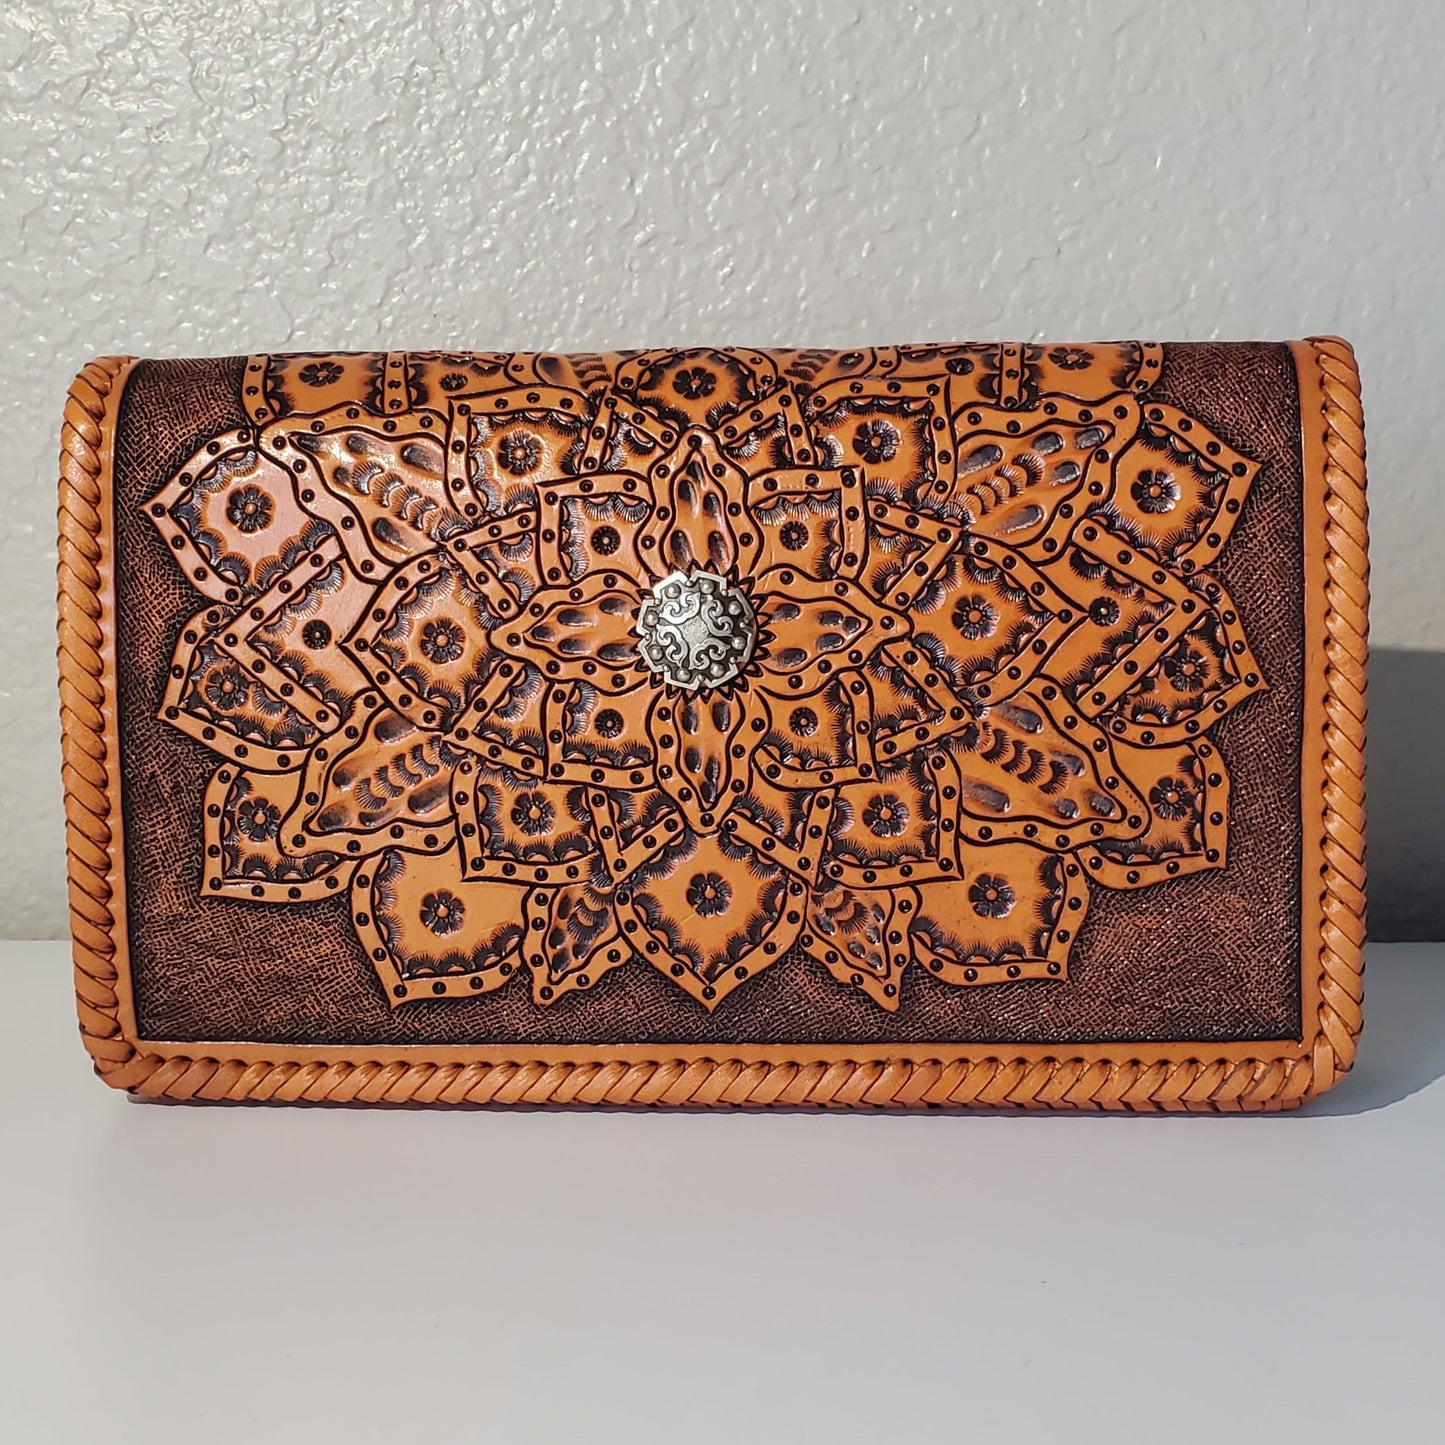 Hand Made Leather Crossbody Bag "CECELIA" by MIOHERMOSA Honey Cecilia Flower